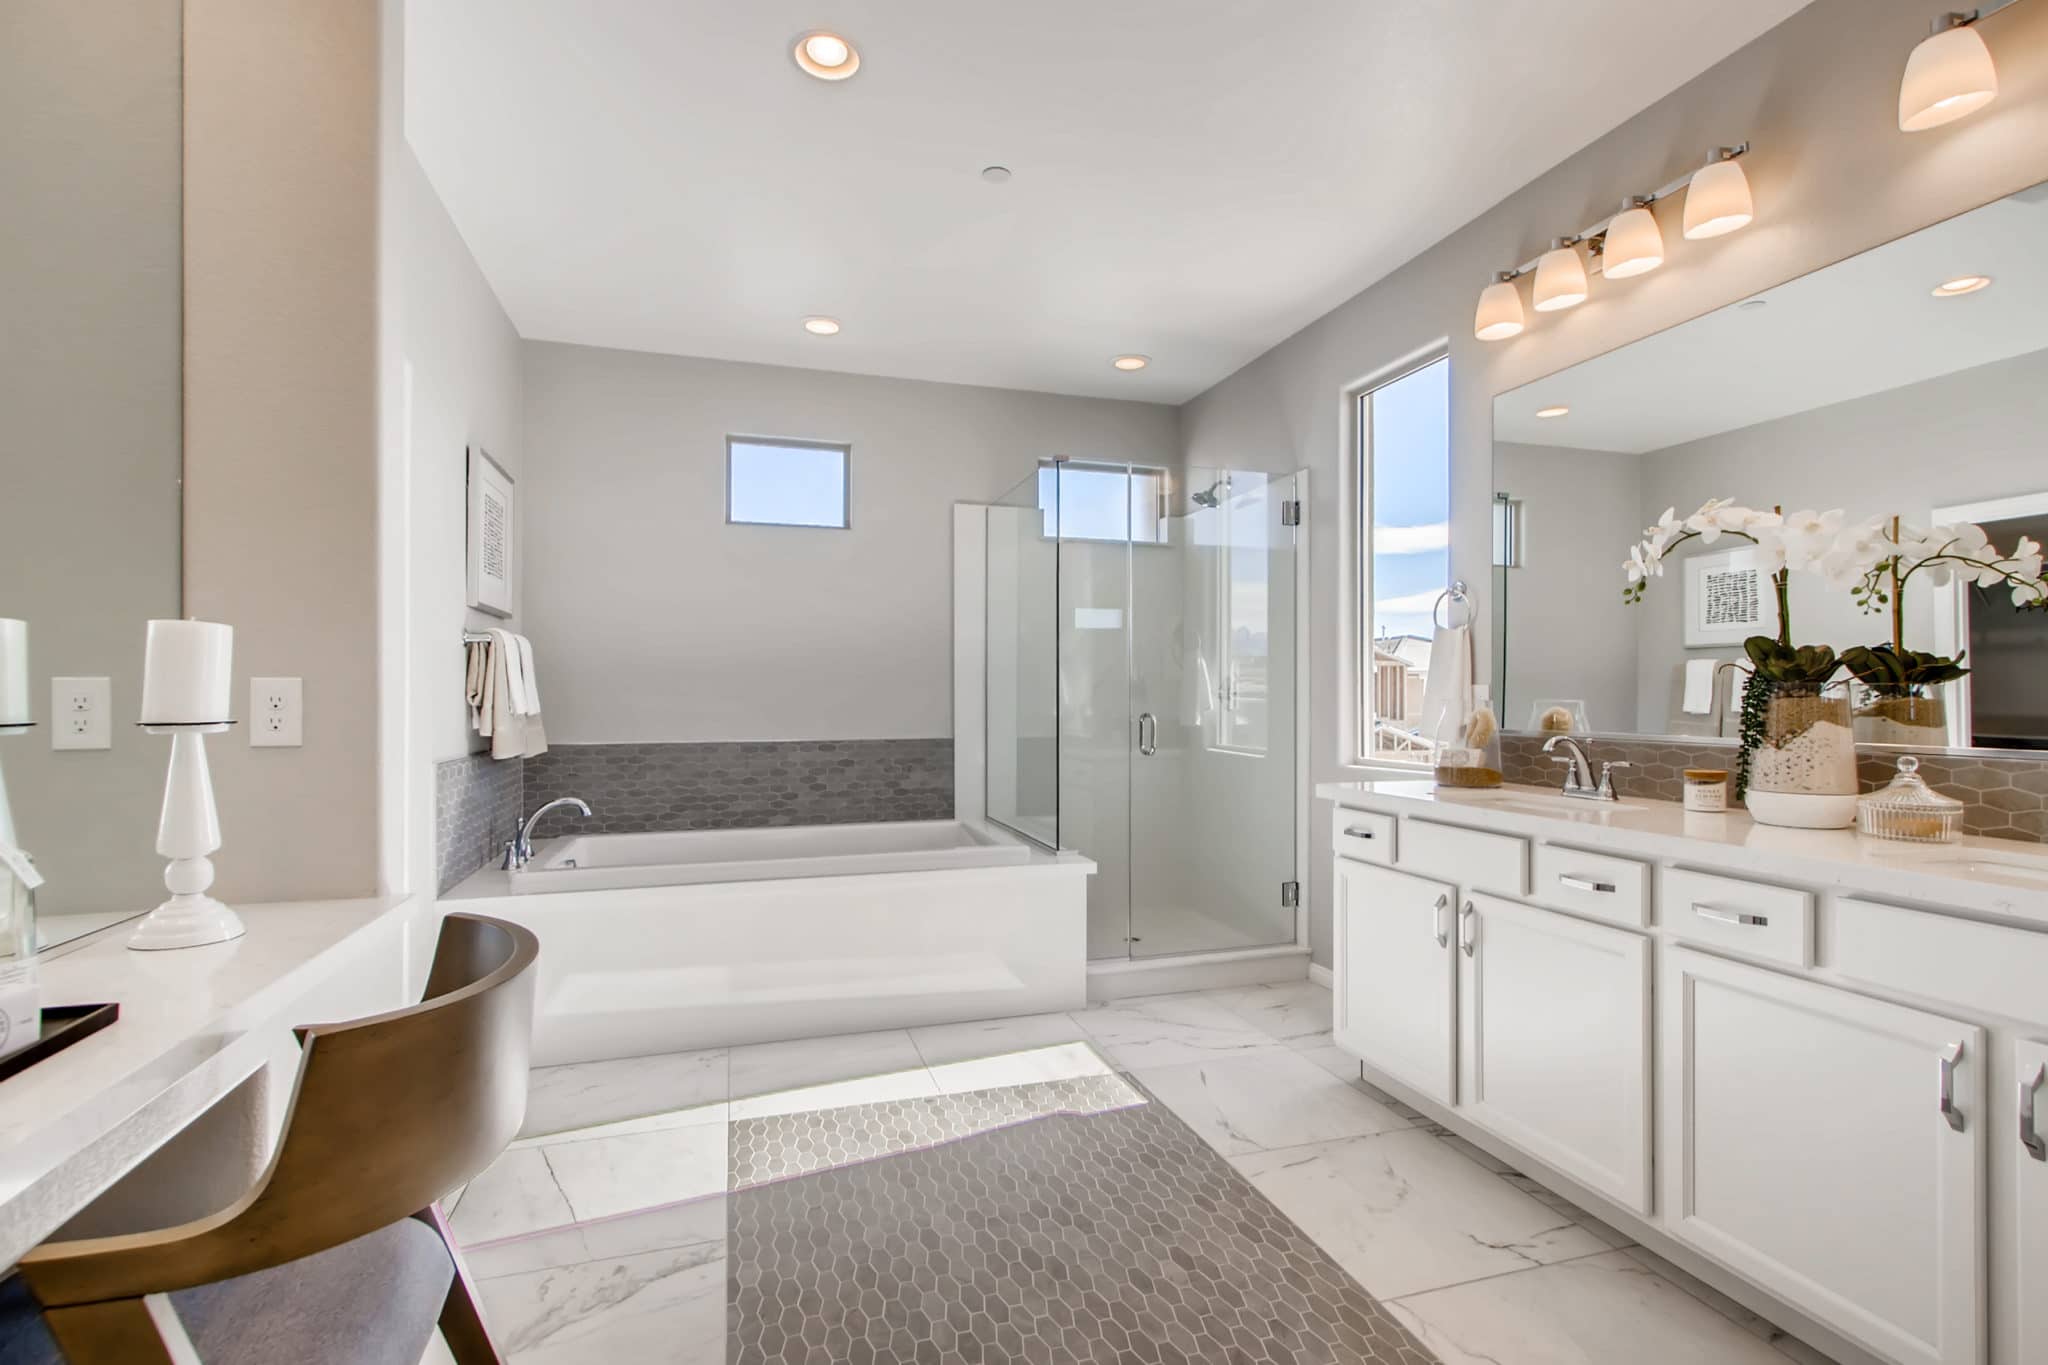 Primary Bathroom of Mojave Plan at Crystal Canyon by Woodside Homes